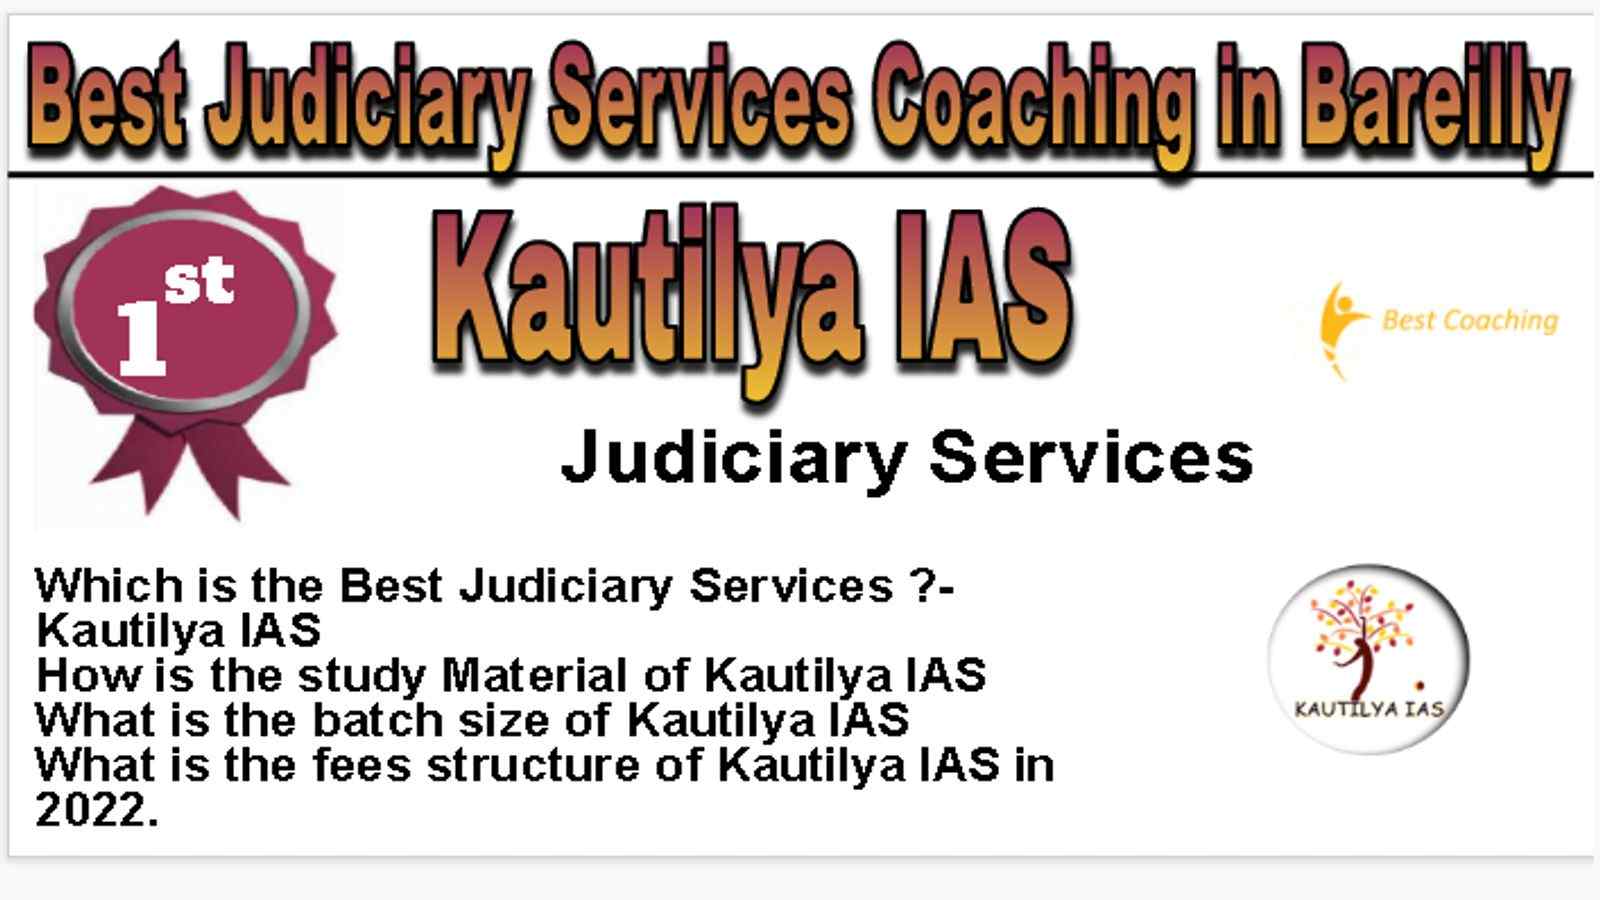 Rank 1 Best Judiciary Services Coaching in Bareilly